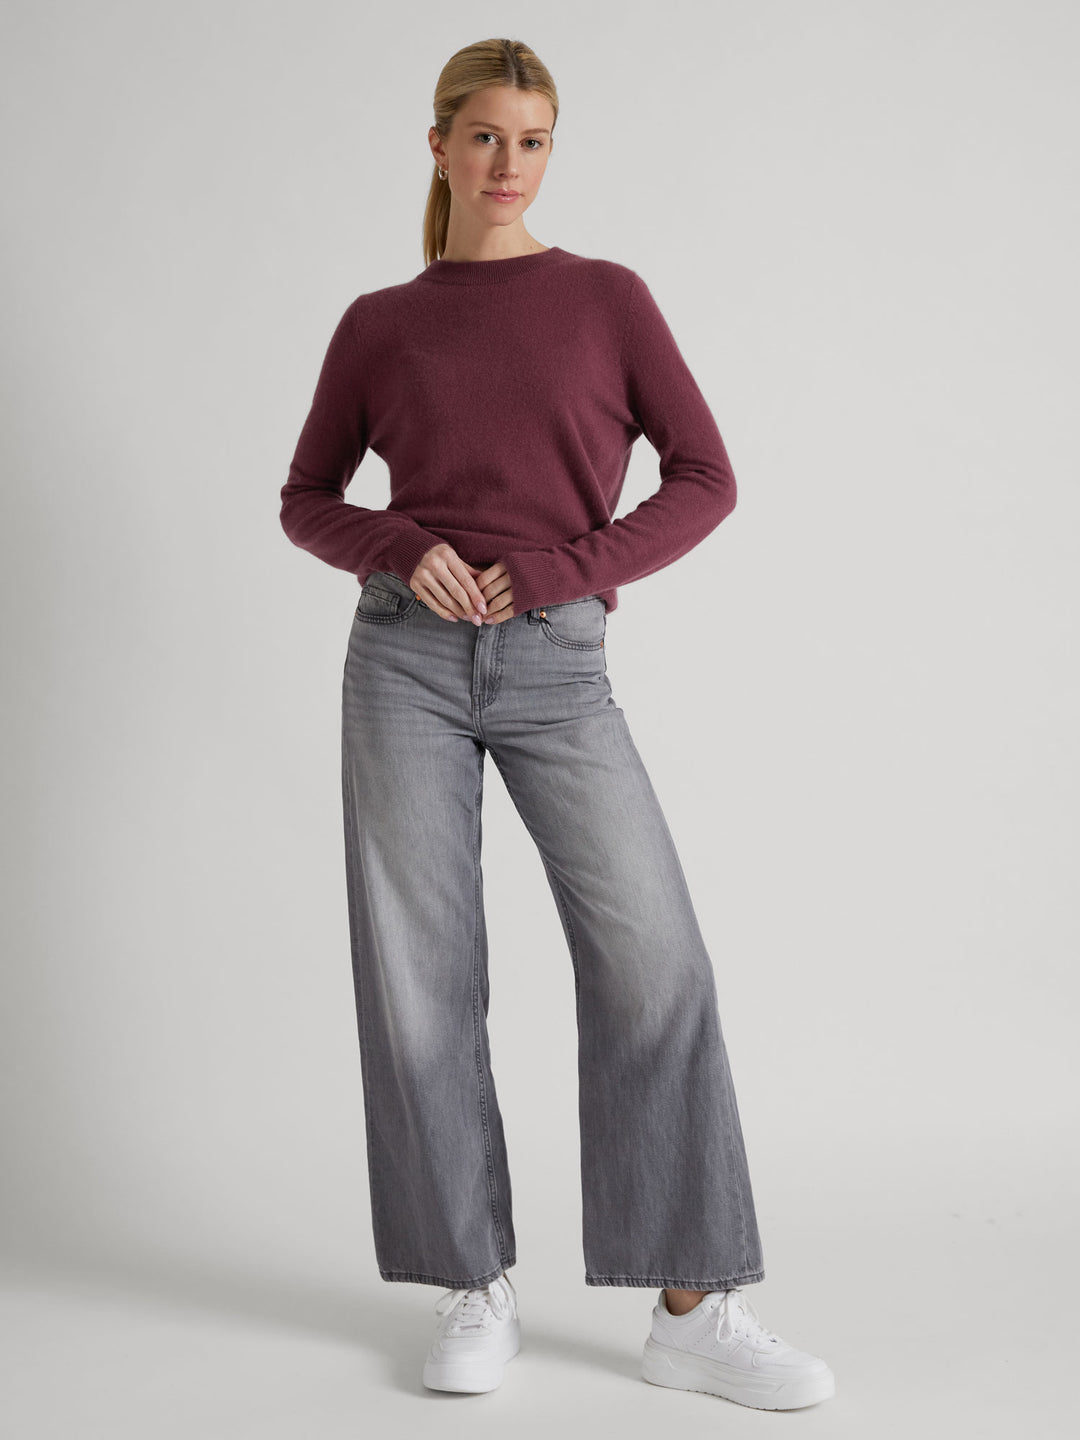  Cashmere sweater "Thora" in 100% pure cashmere. Long sleeves, round neck. Scandinavian design by Kashmina. Color: Wild Plum.